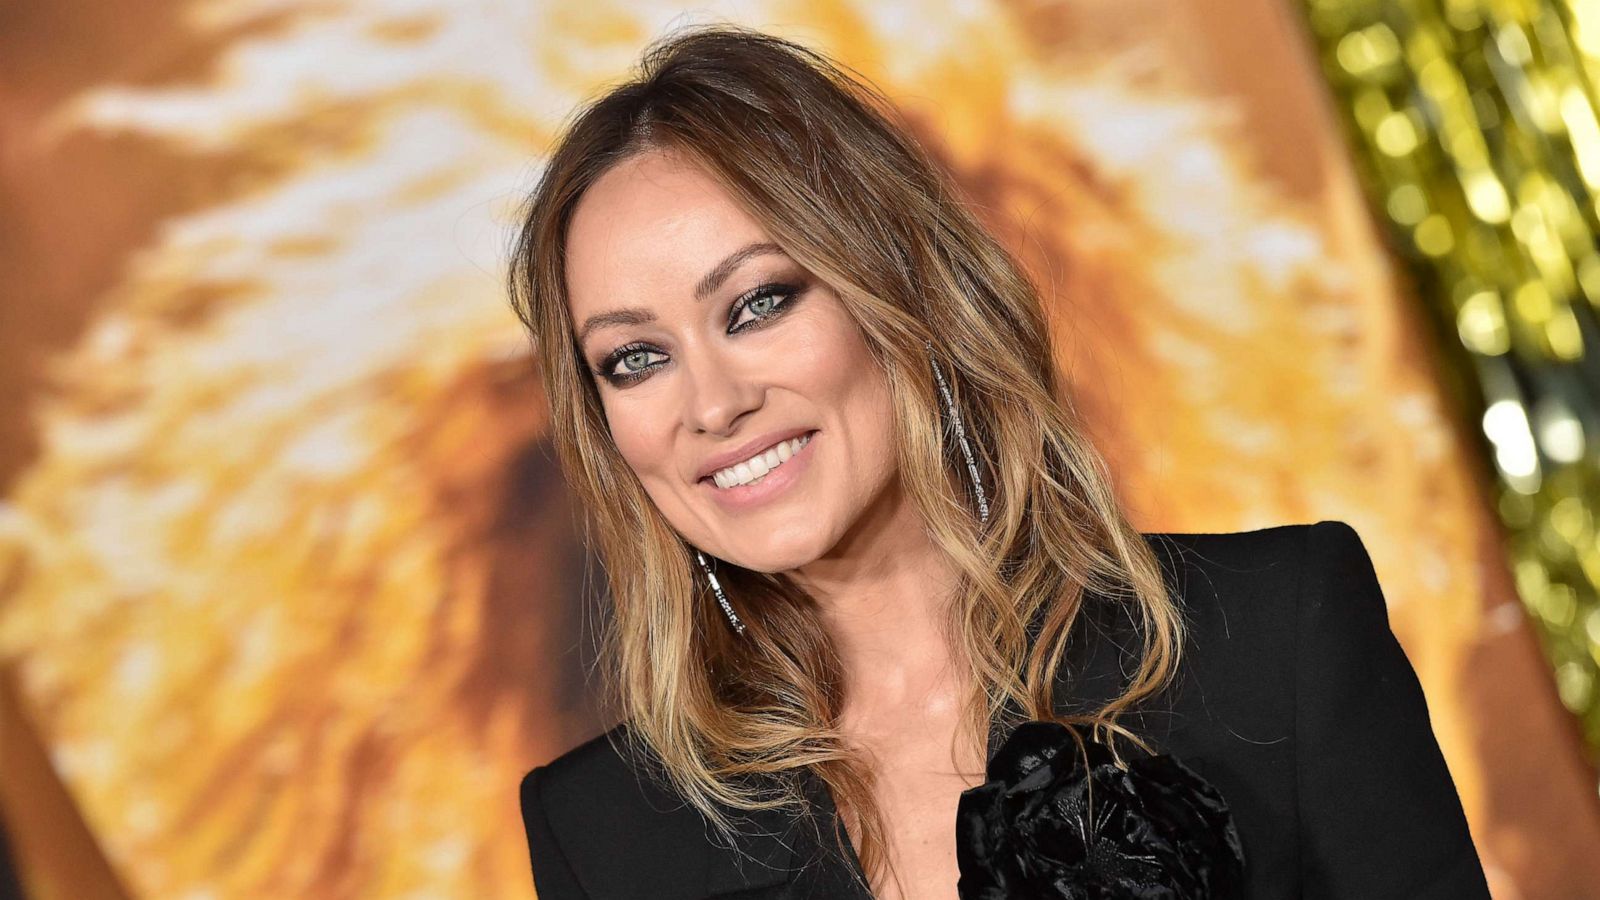 Olivia Wilde debuts delicate forearm tattoos dedicated to children Otis and  Daisy  Daily Mail Online